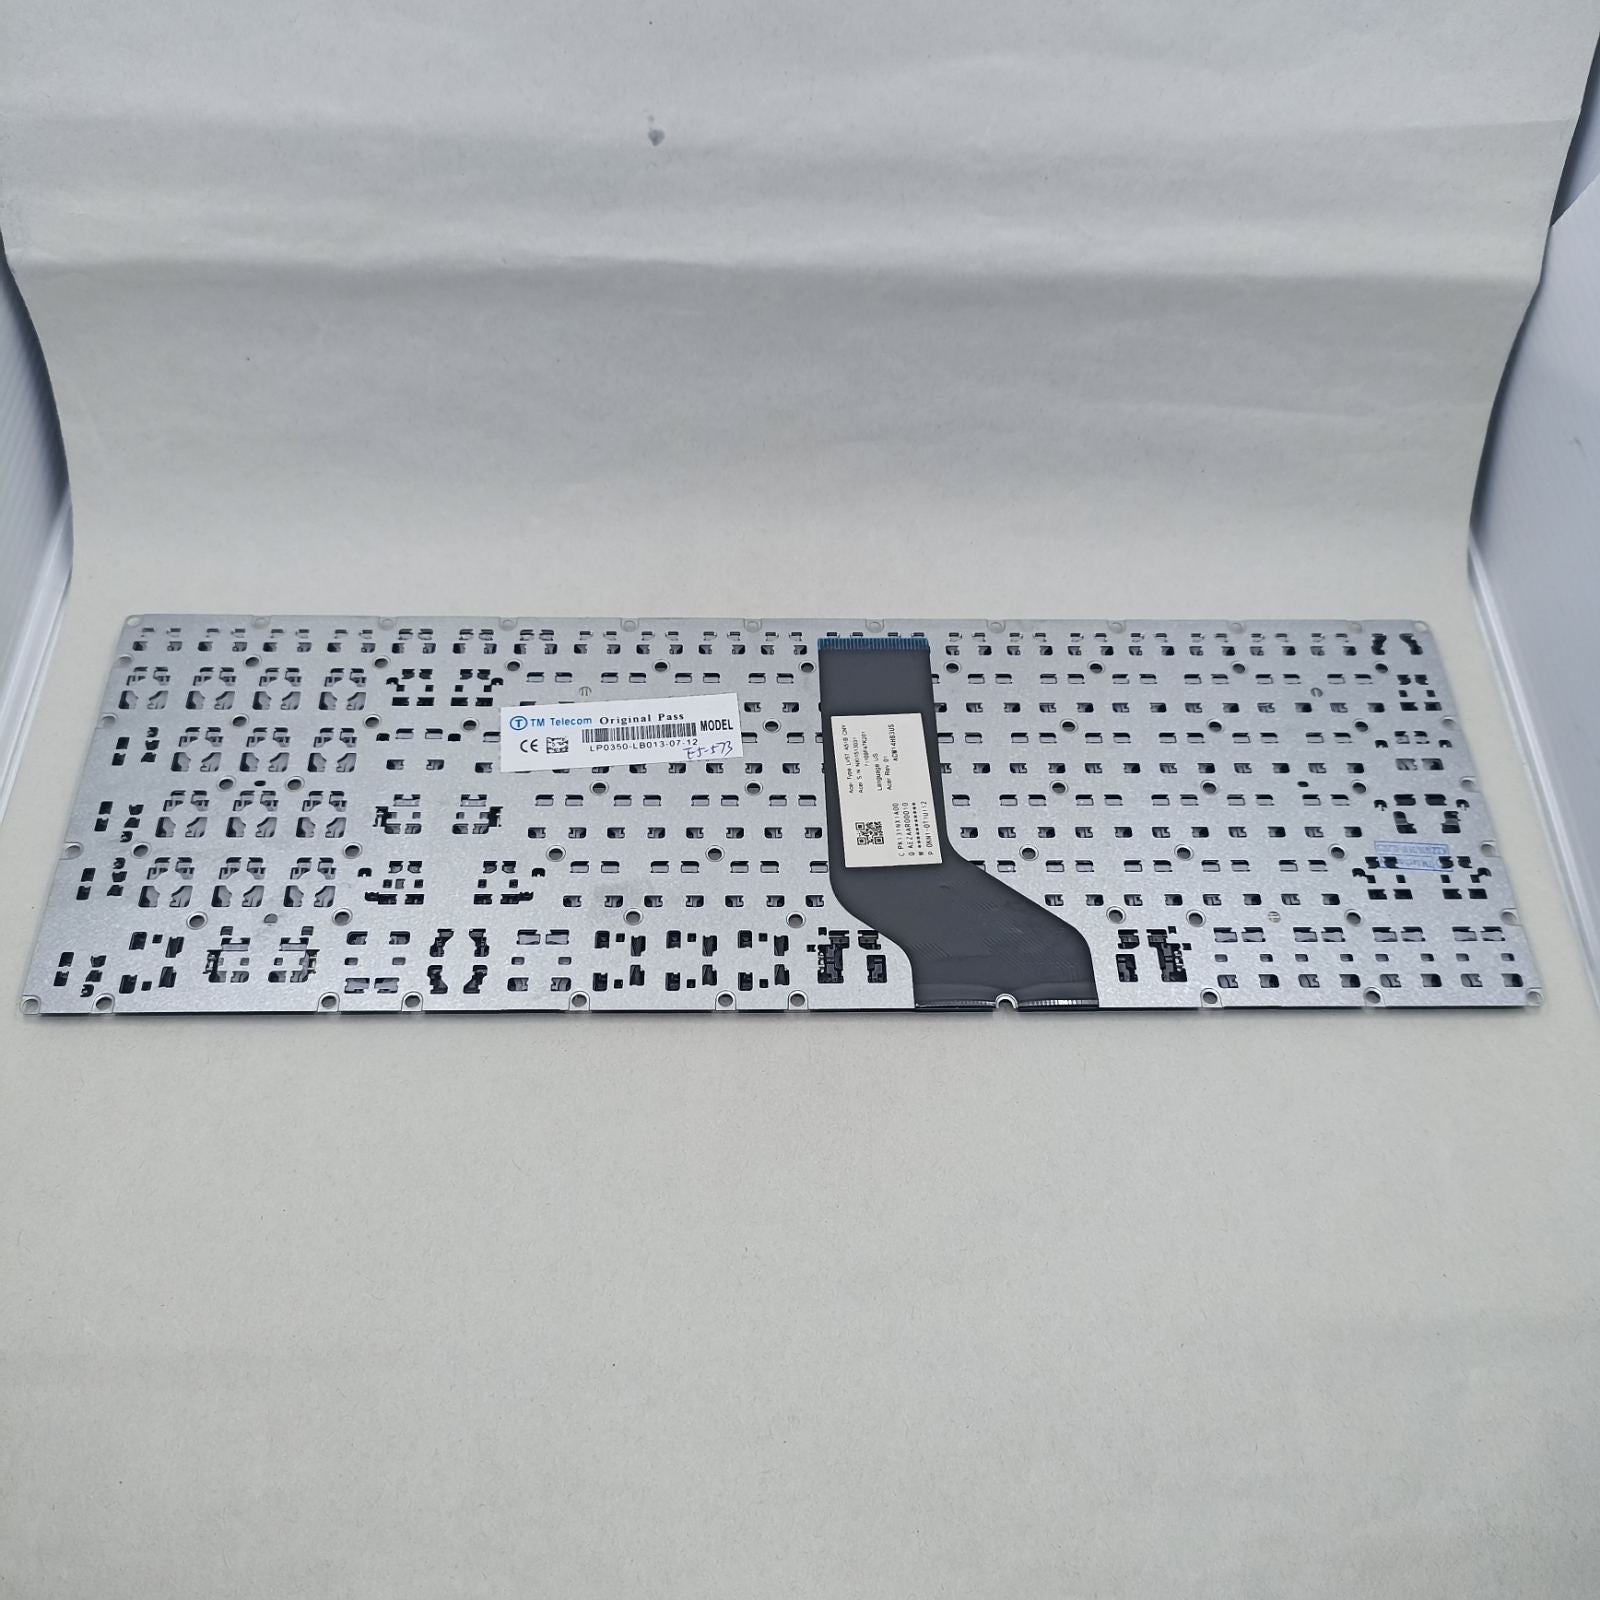 Replacement Keyboard Keys for Acer A515-52G A1